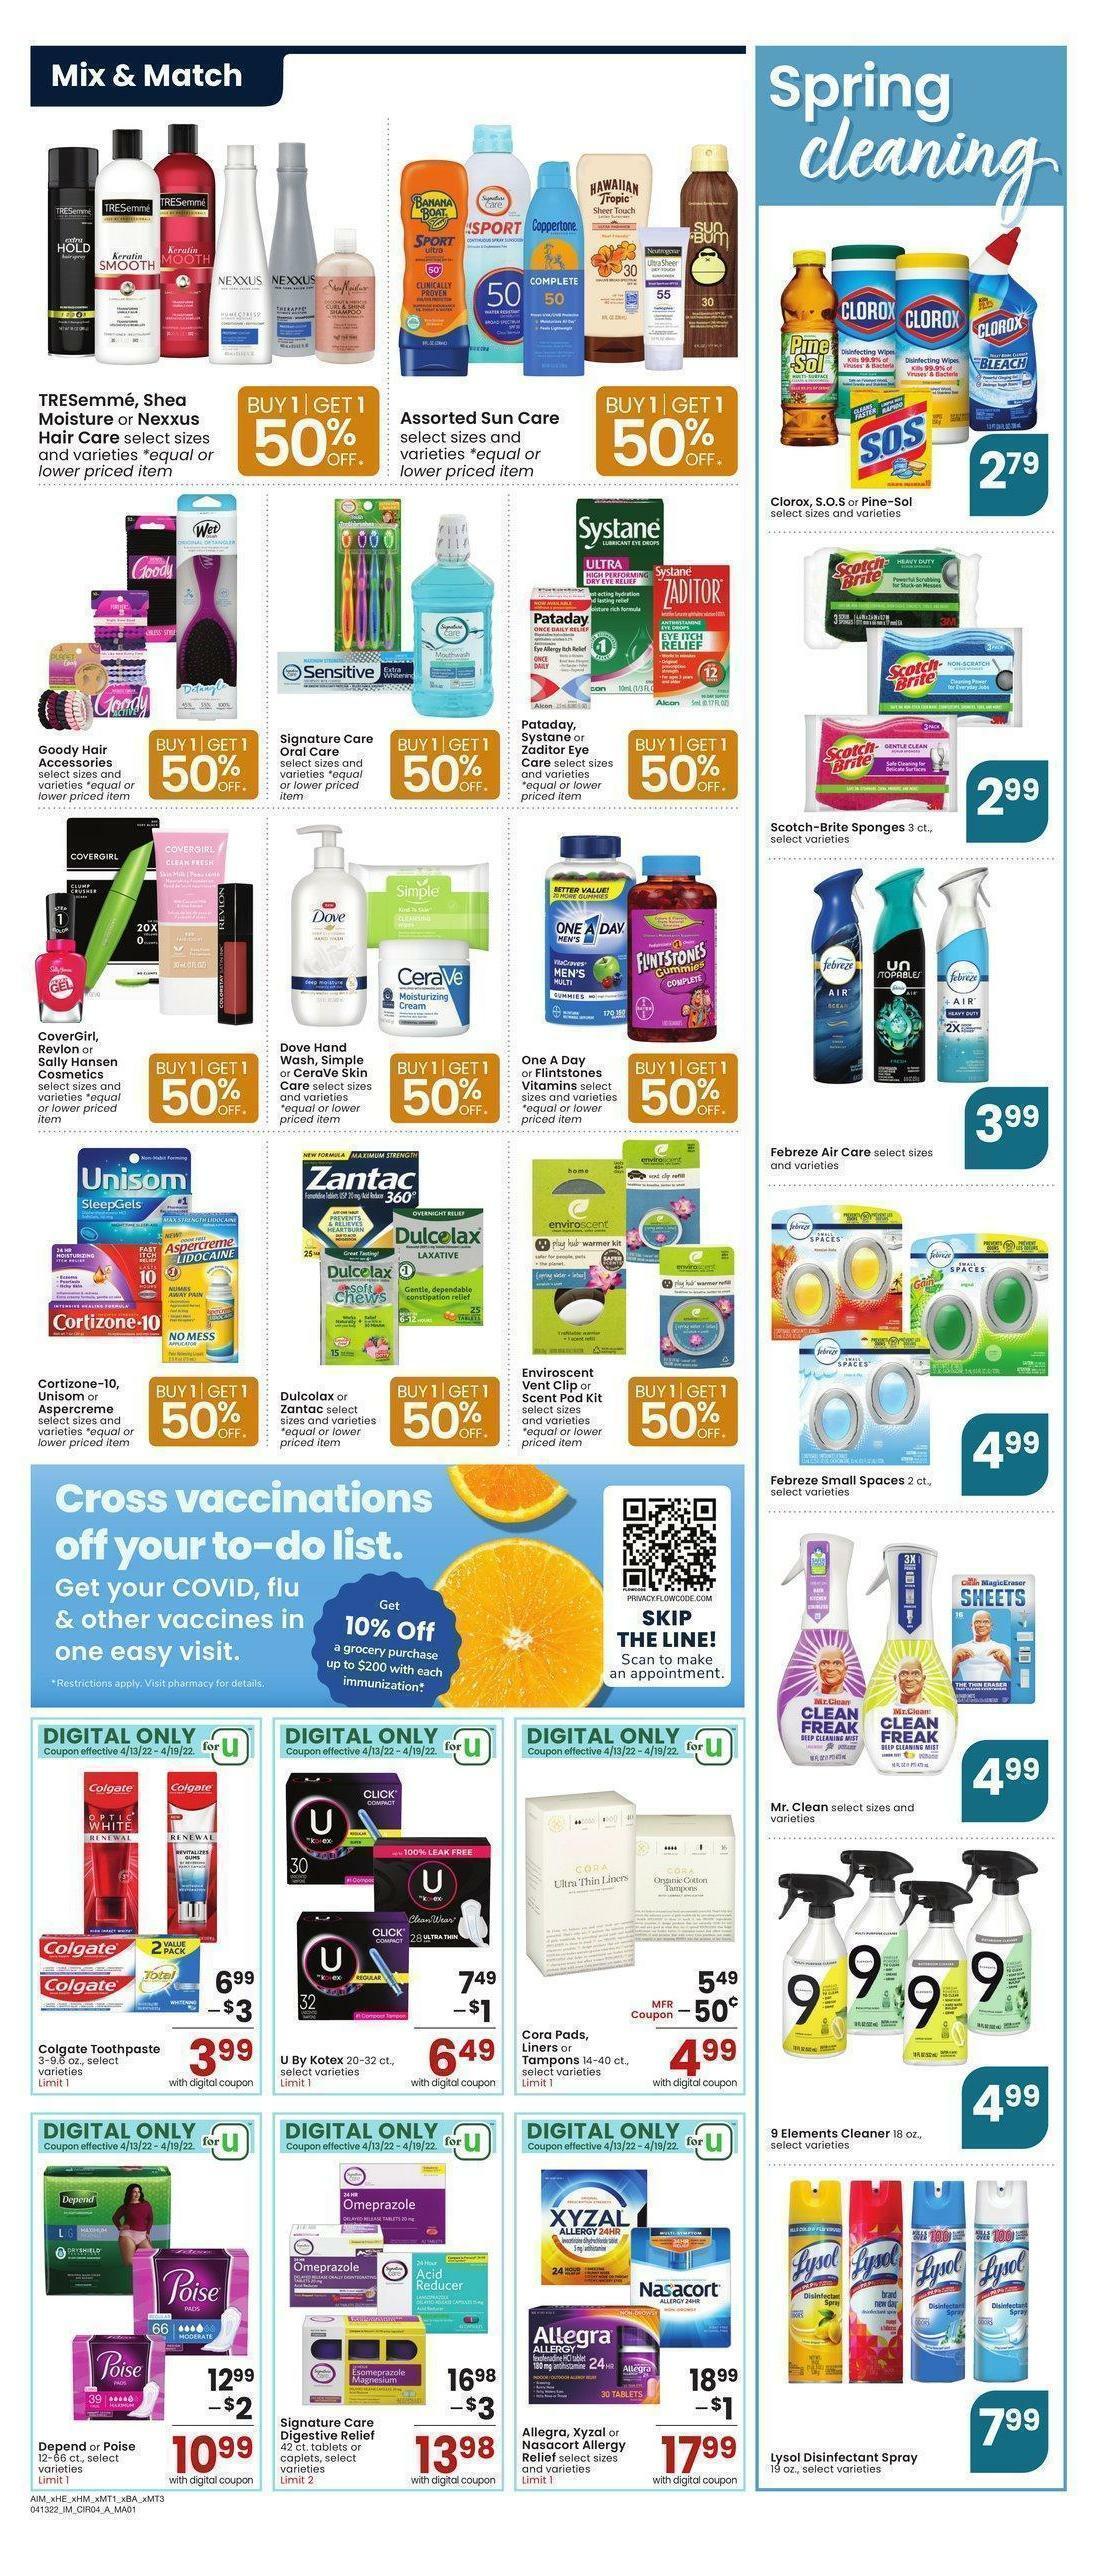 Albertsons Weekly Ad from April 13